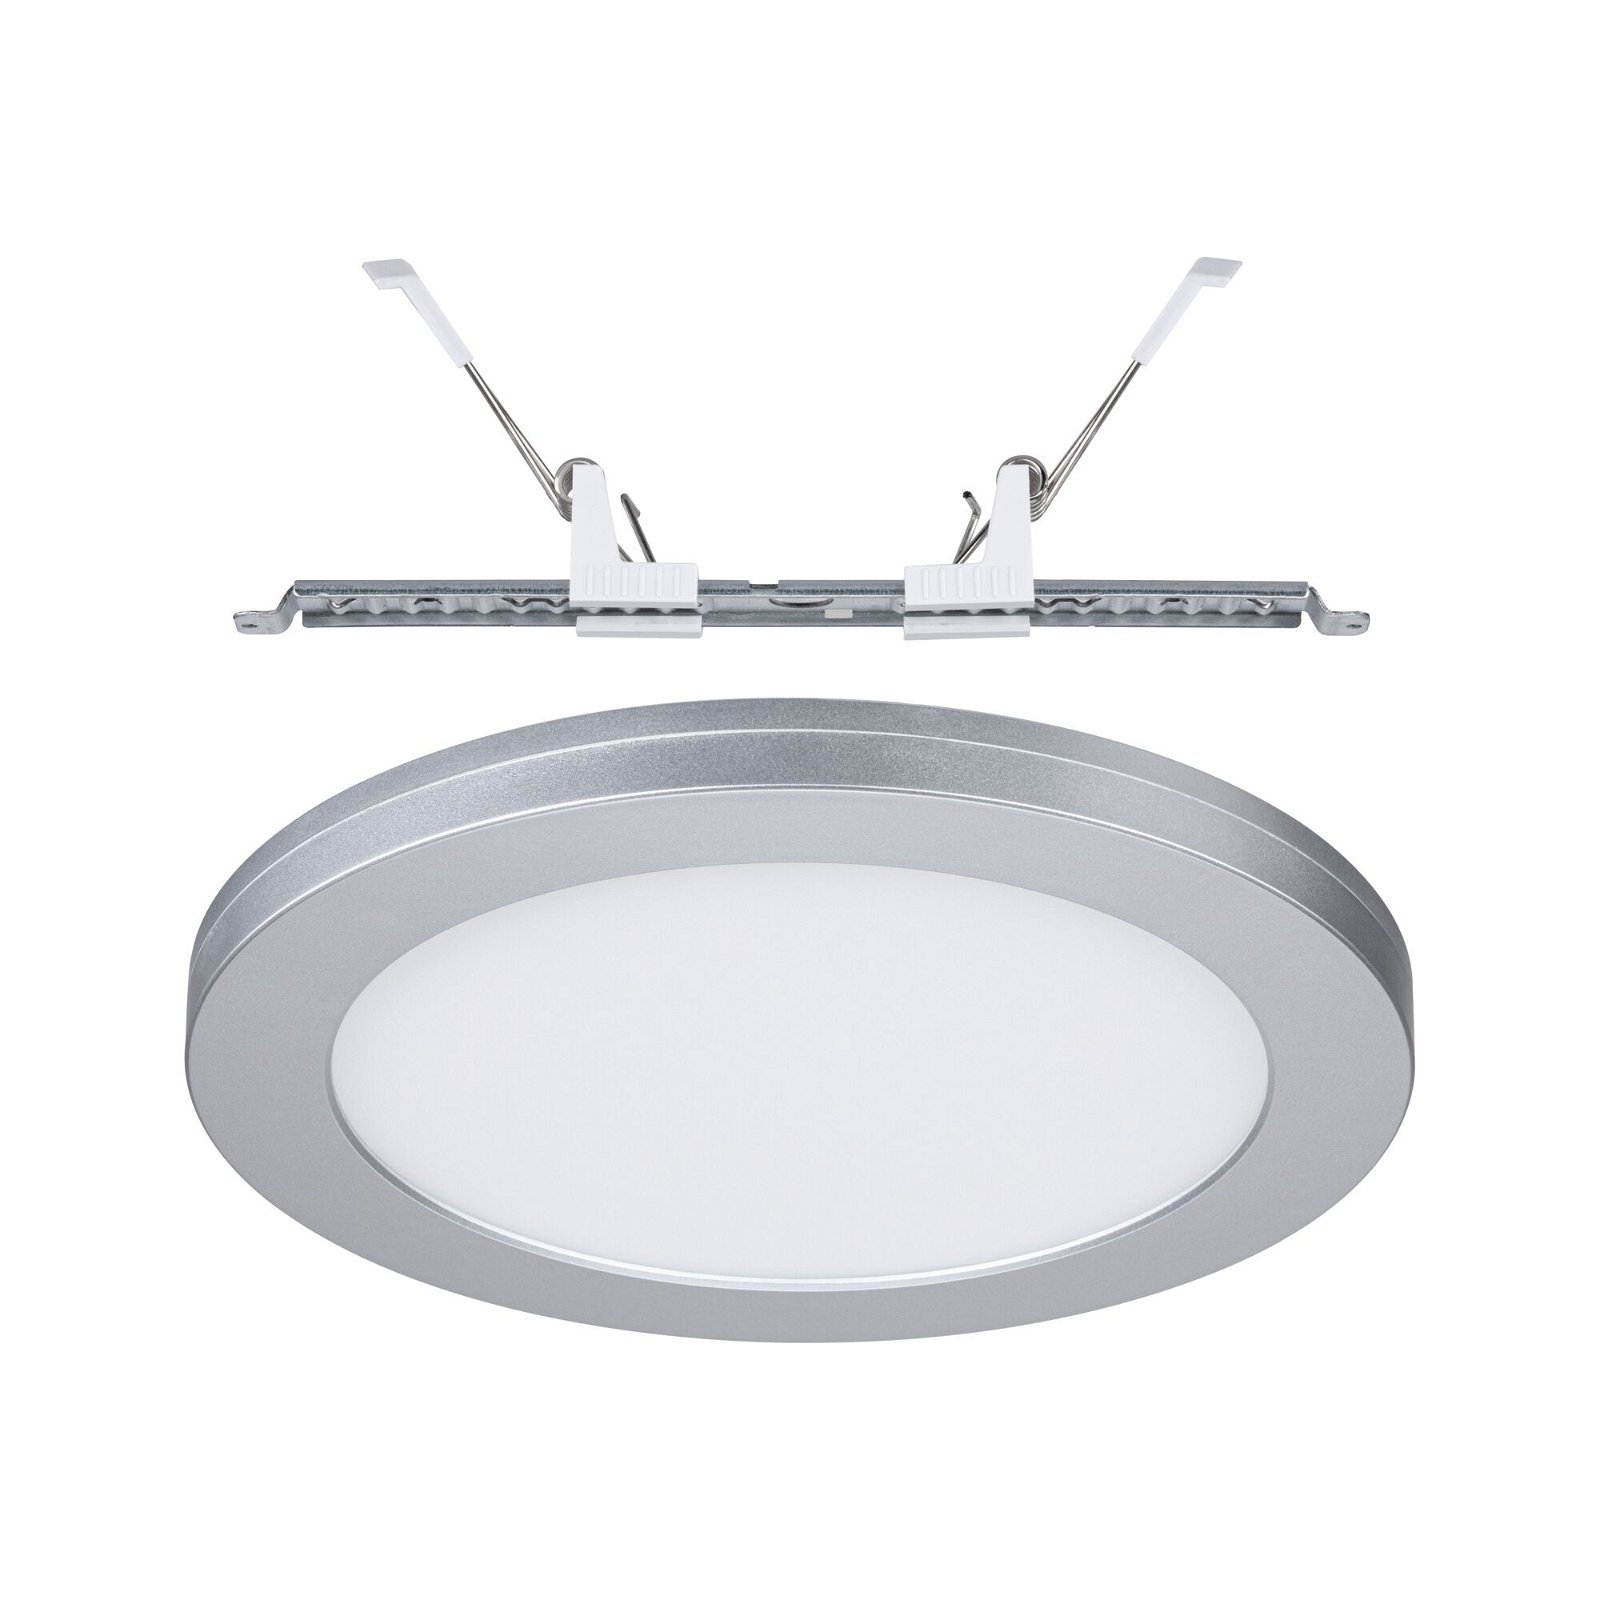 LED Recessed panel 2in1 Cover-it round 225mm 16,5W 1200lm 4000K Chrome matt